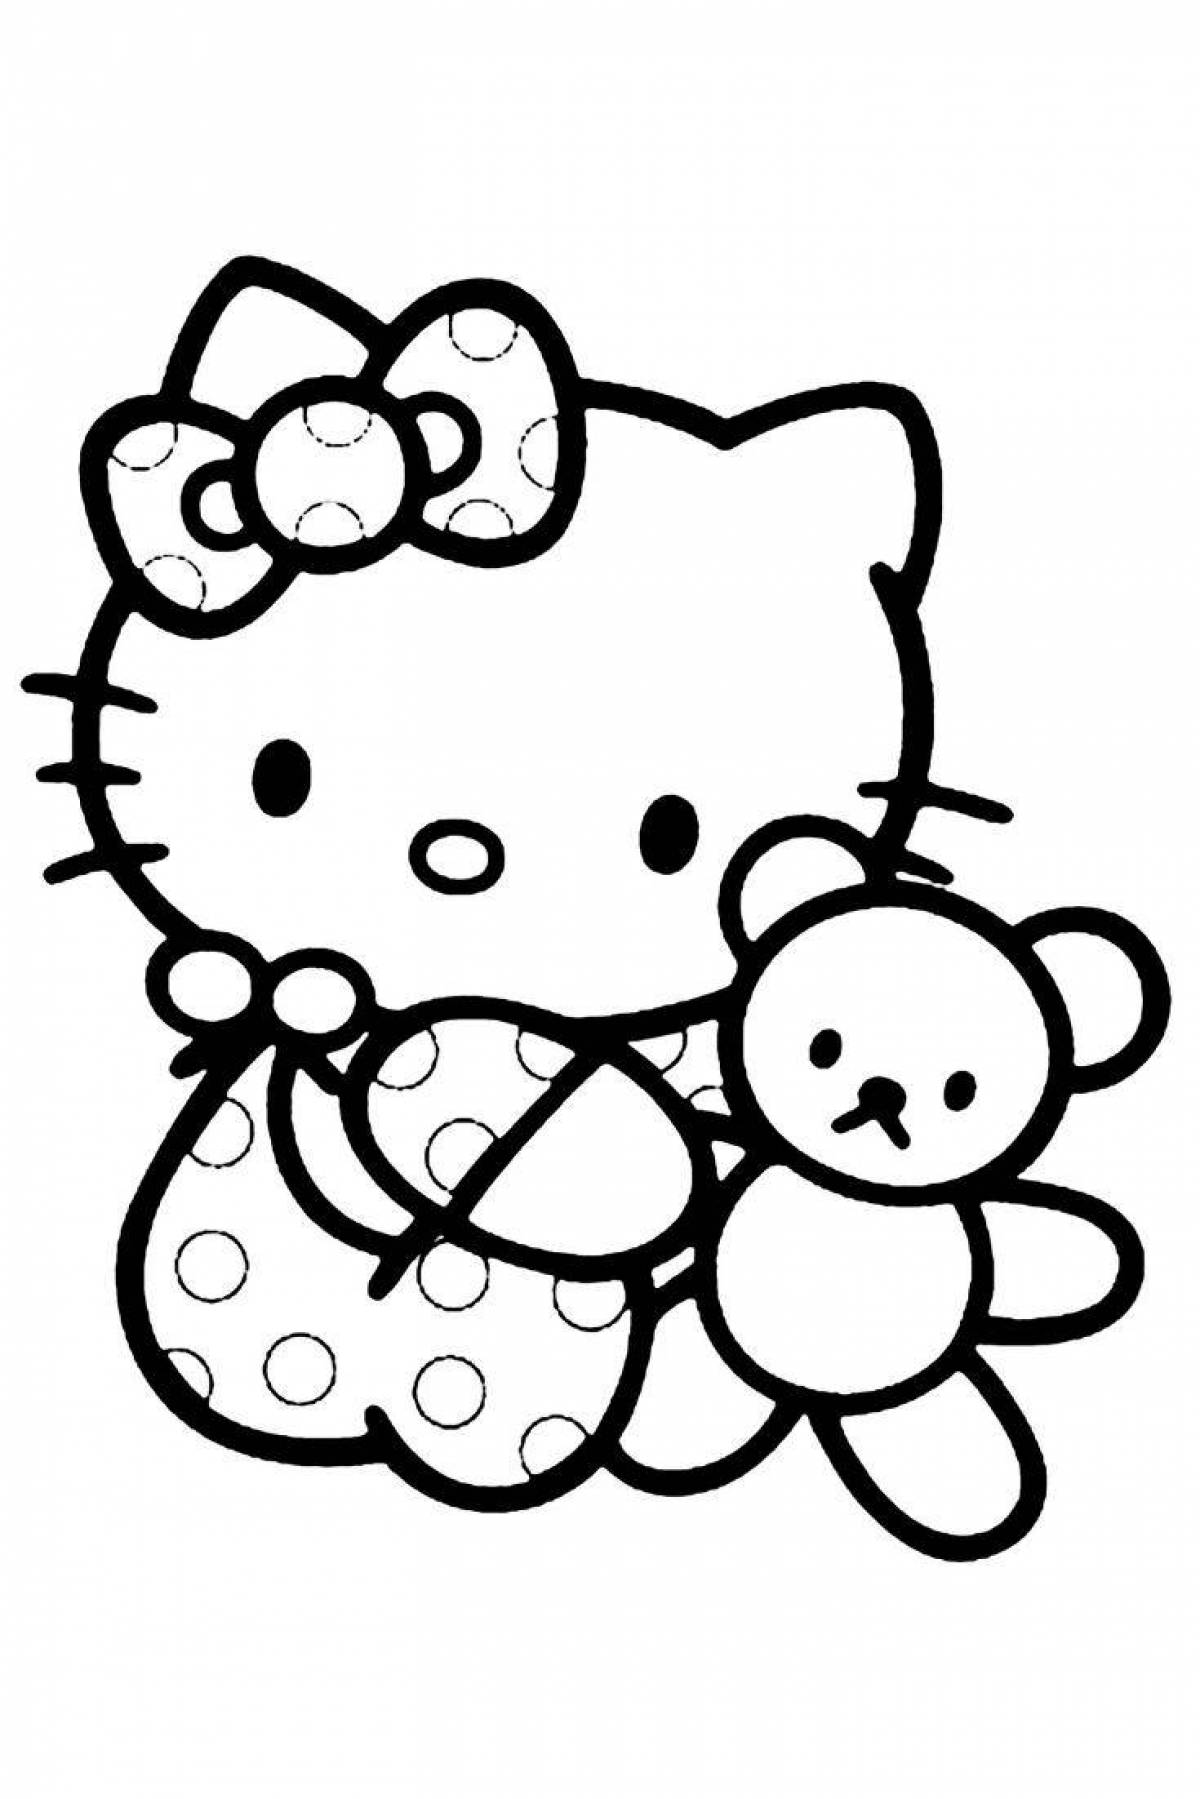 Joyful coloring by numbers hello kitty